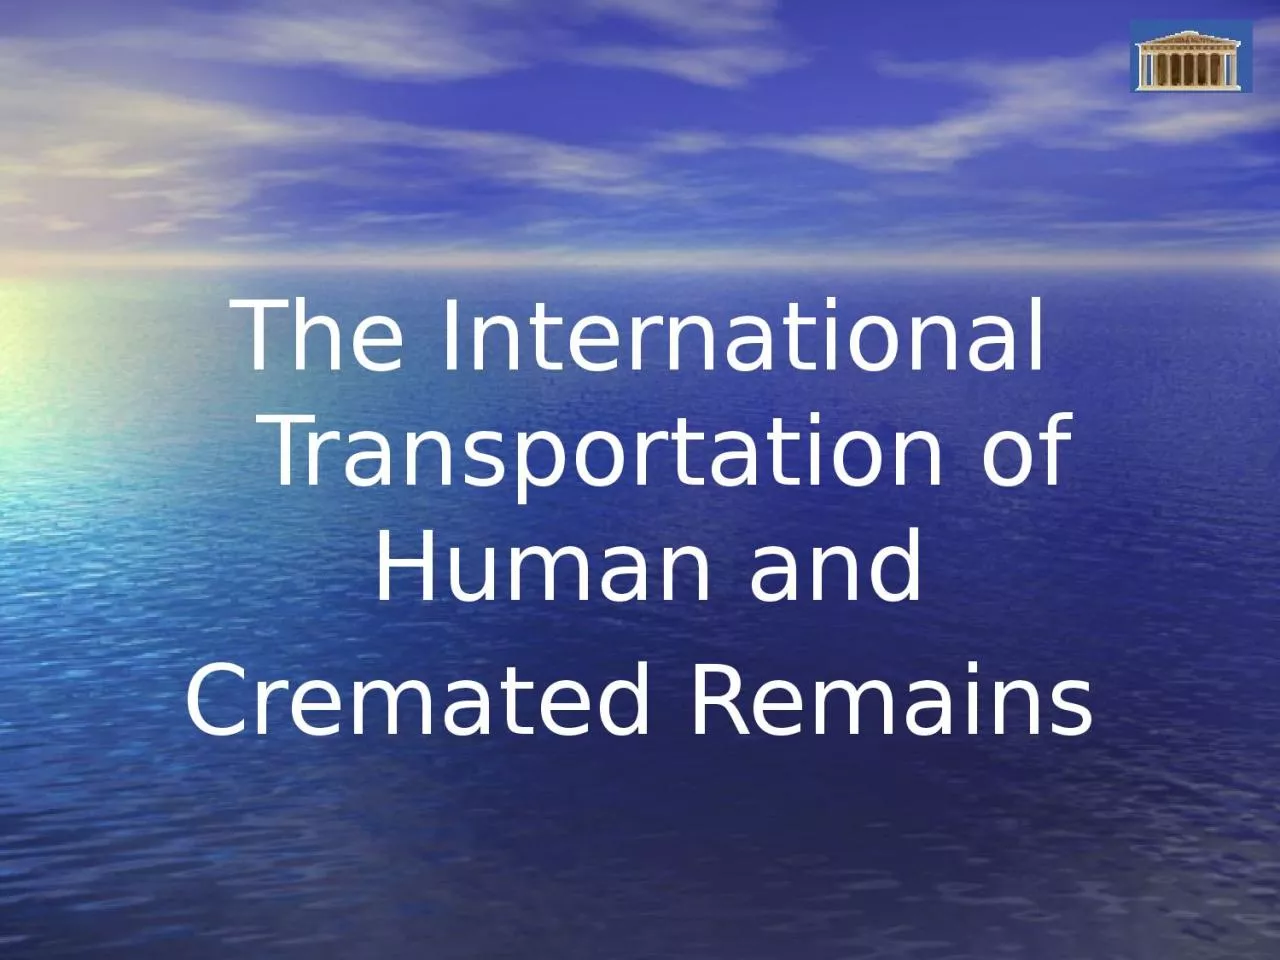 The International Transportation of Human and